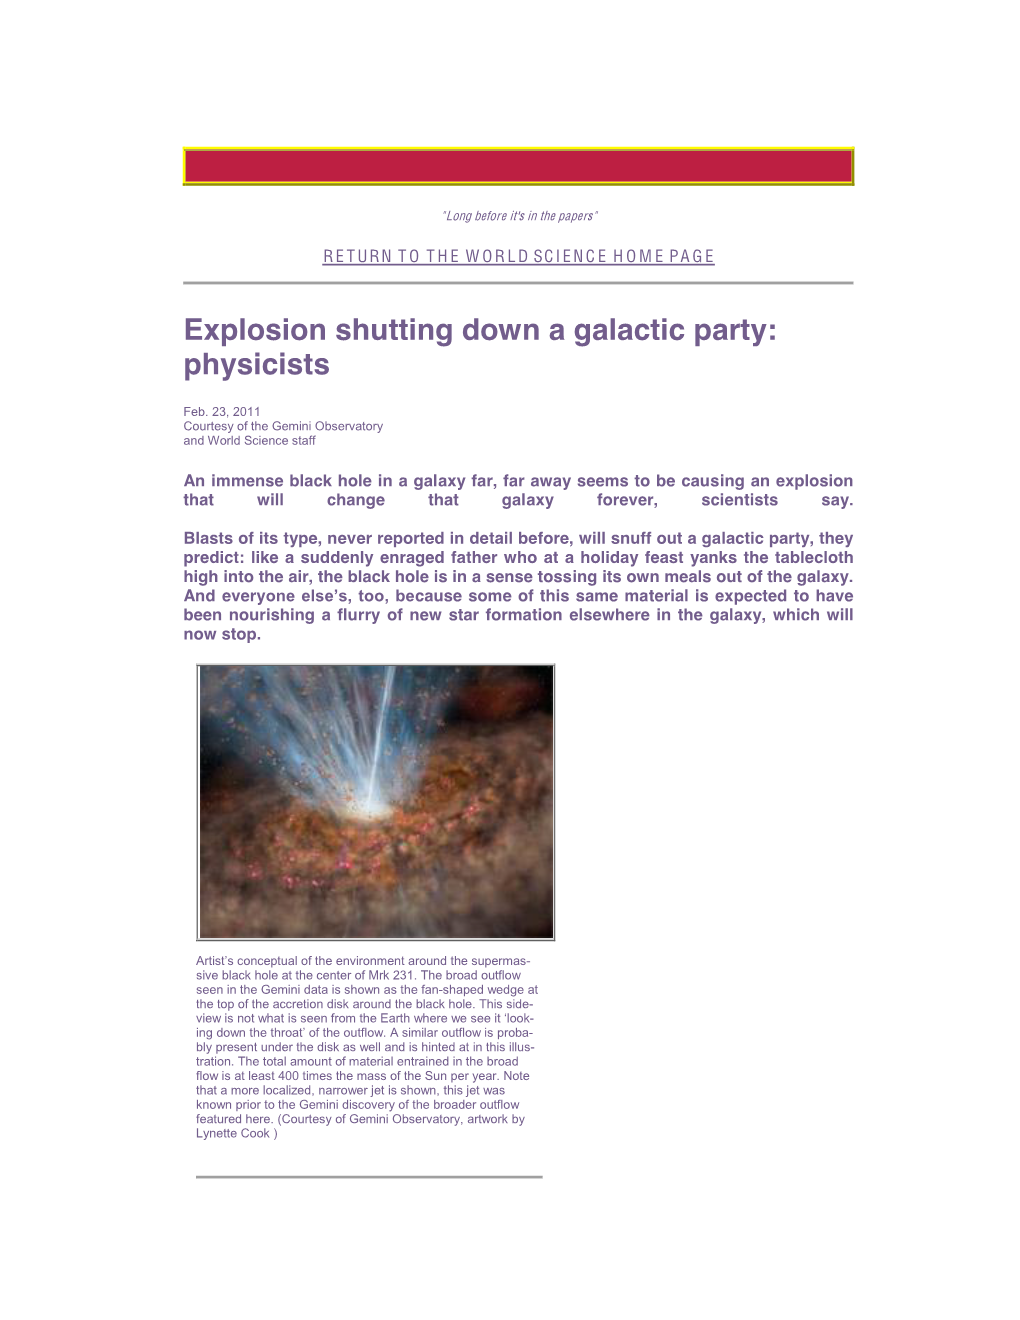 Explosion Shutting Down a Galactic Party: Physicists